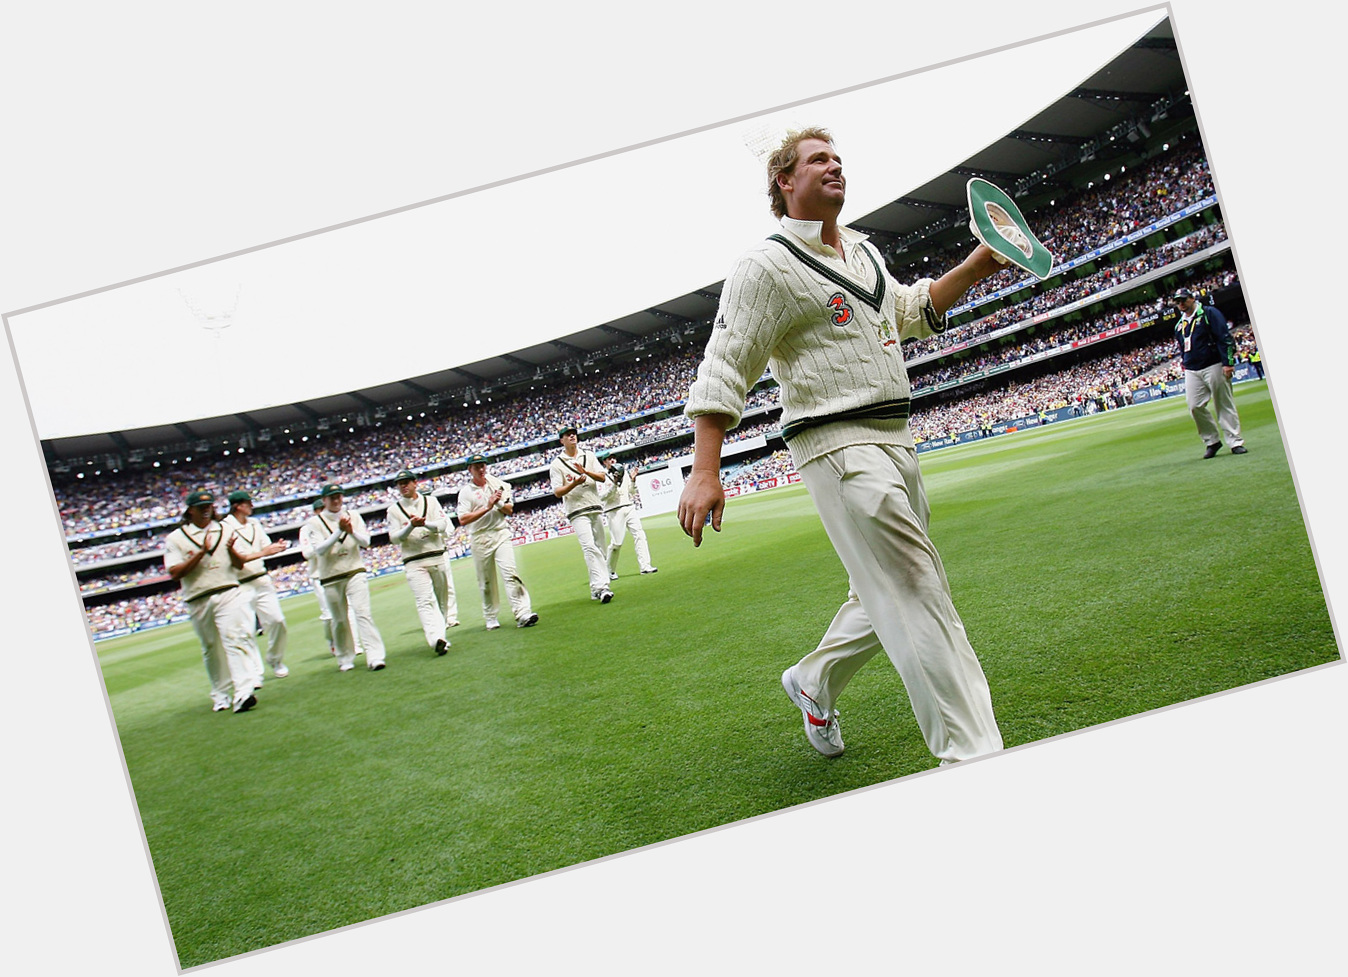 Today, Shane Warne would have turned 53. 

Happy birthday Warnie, we miss you! 